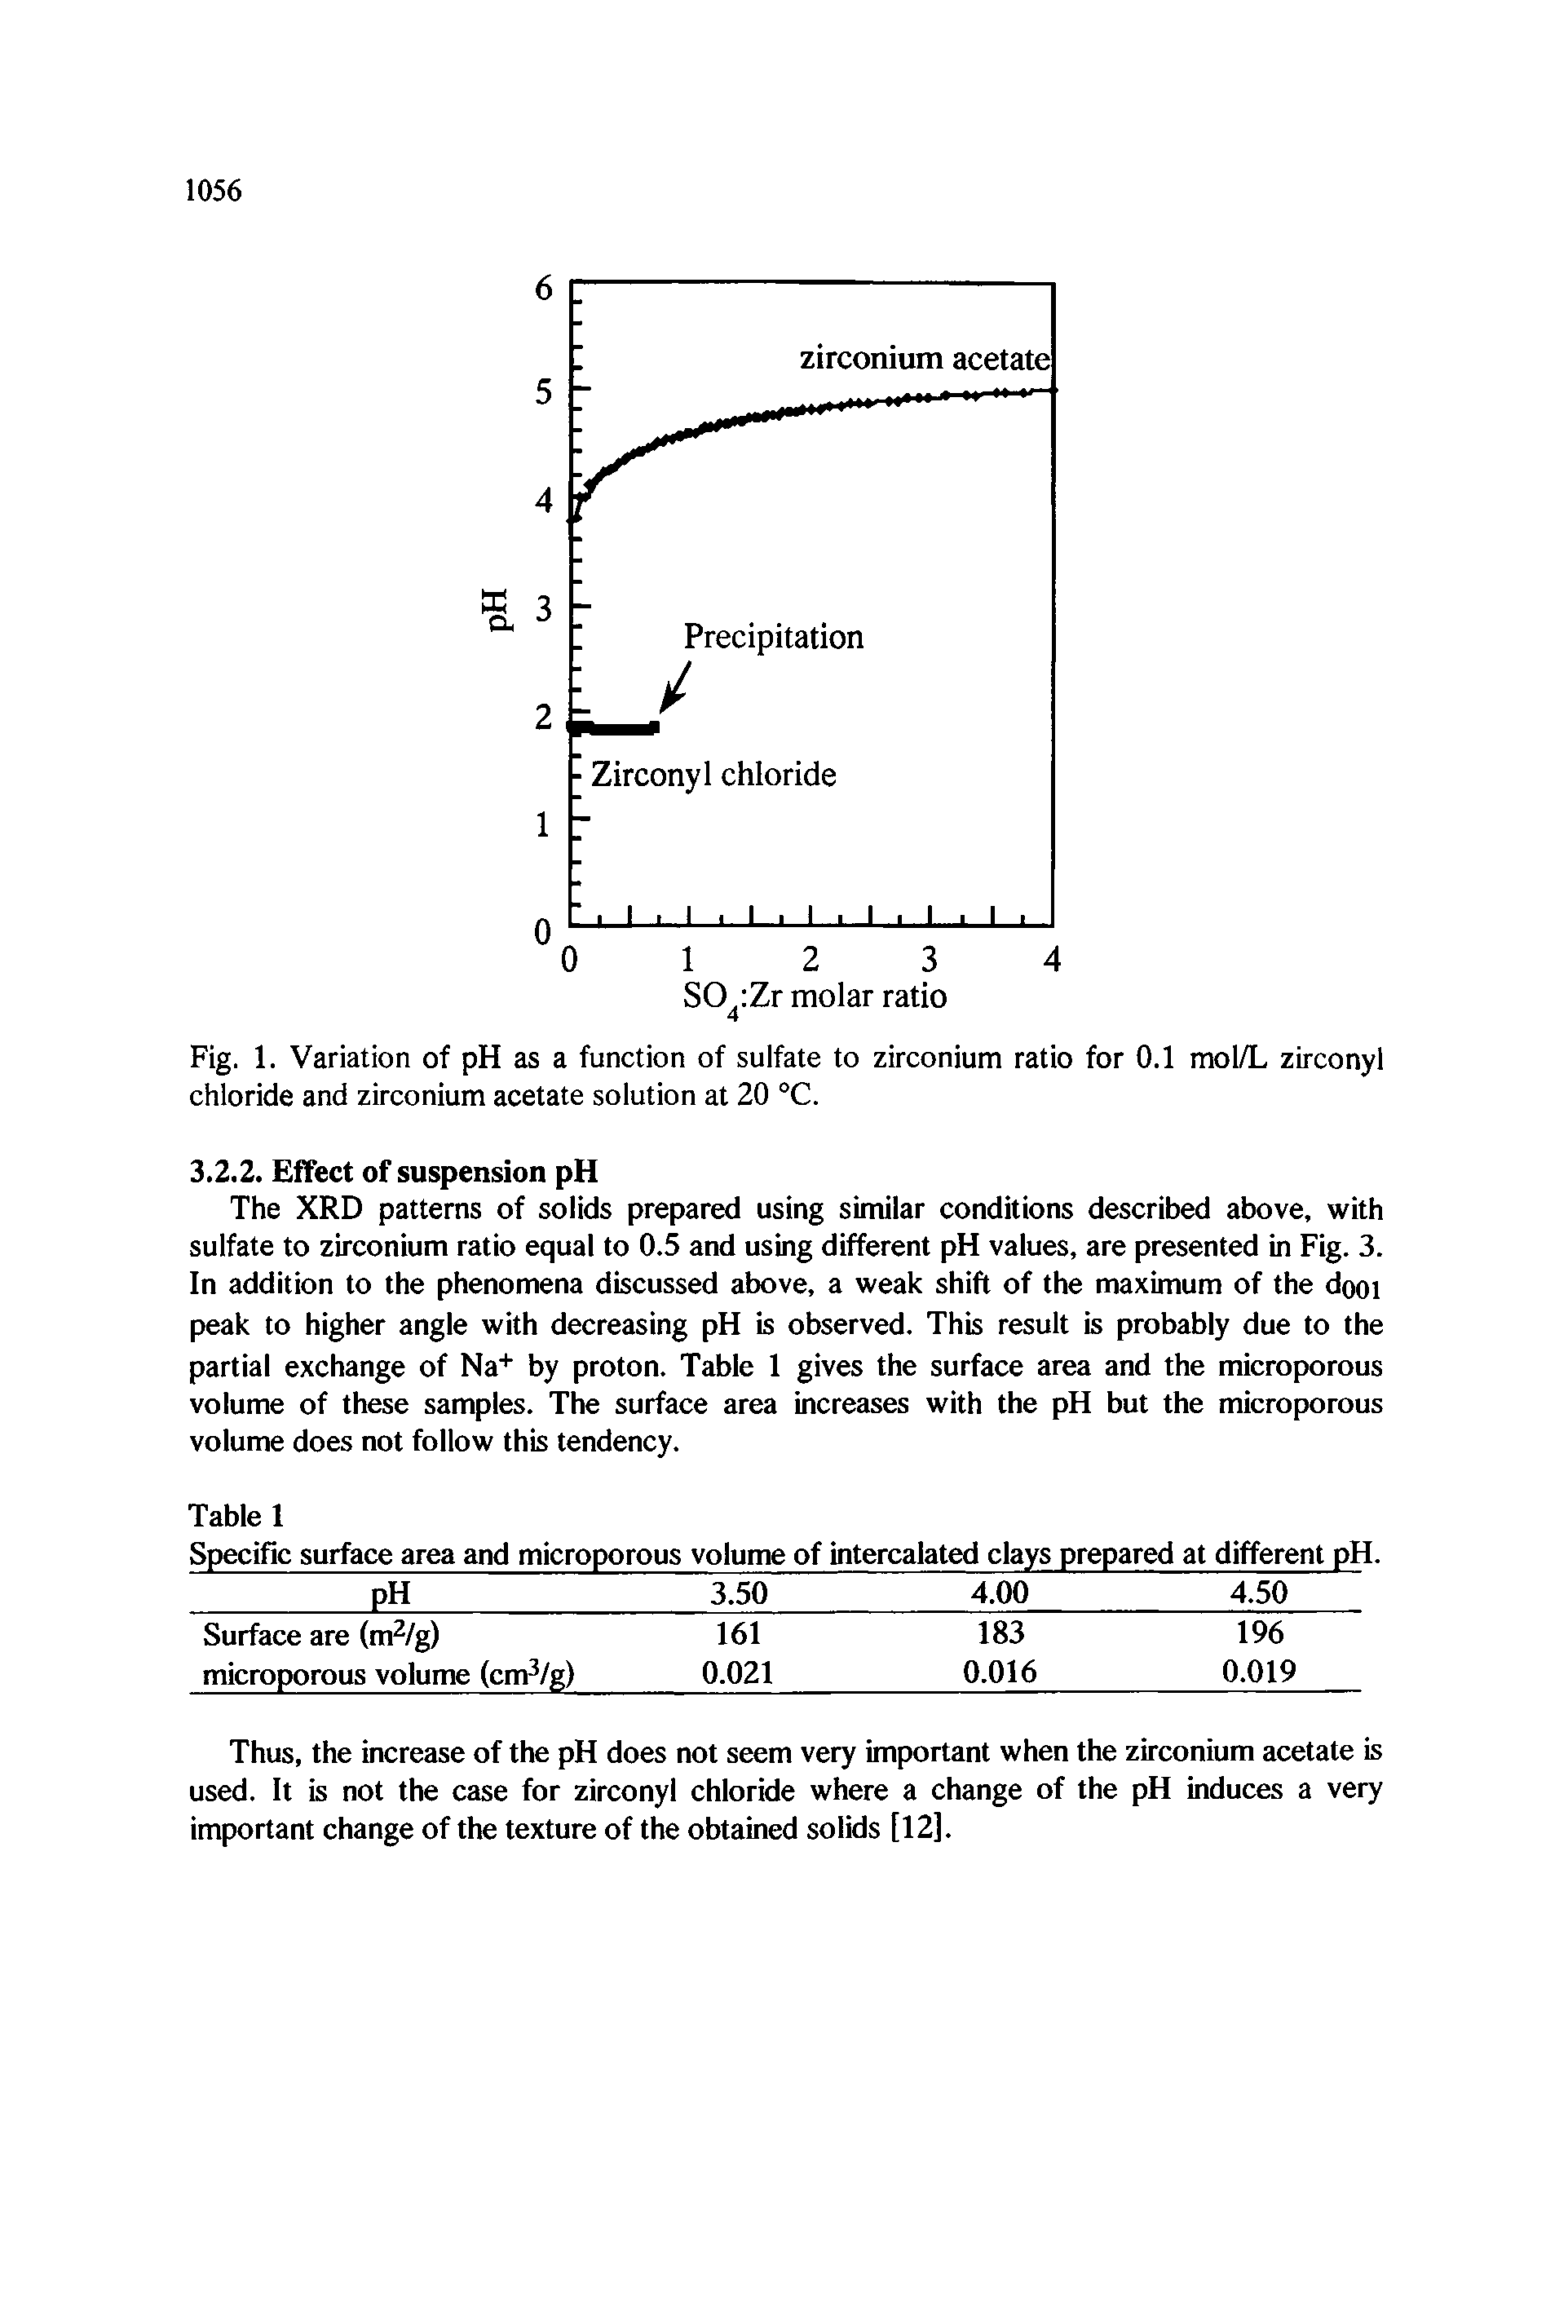 Fig. 1. Variation of pH as a function of sulfate to zirconium ratio for 0.1 mol/L zirconyl chloride and zirconium acetate solution at 20 °C.